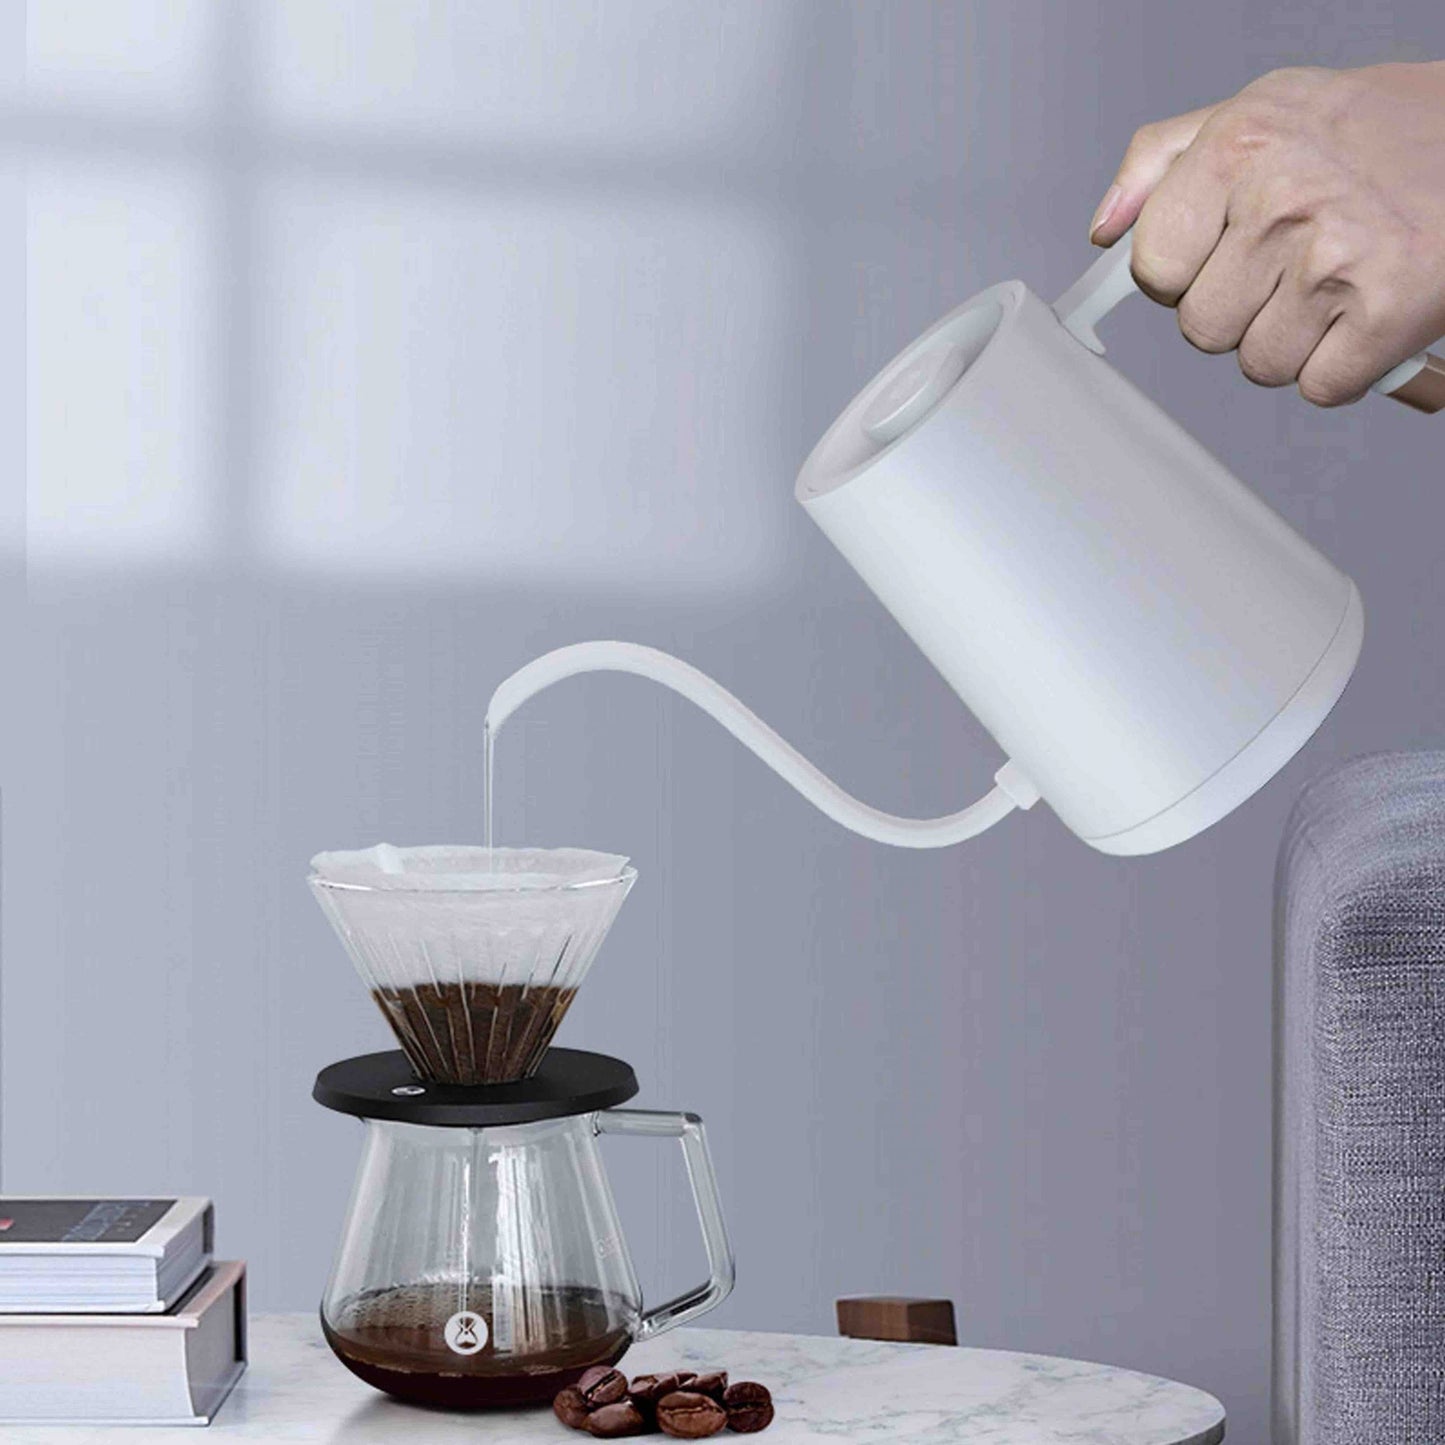 Timemore Fish Smart Electric Pour Over Kettle Experiential Filter Coffee Session